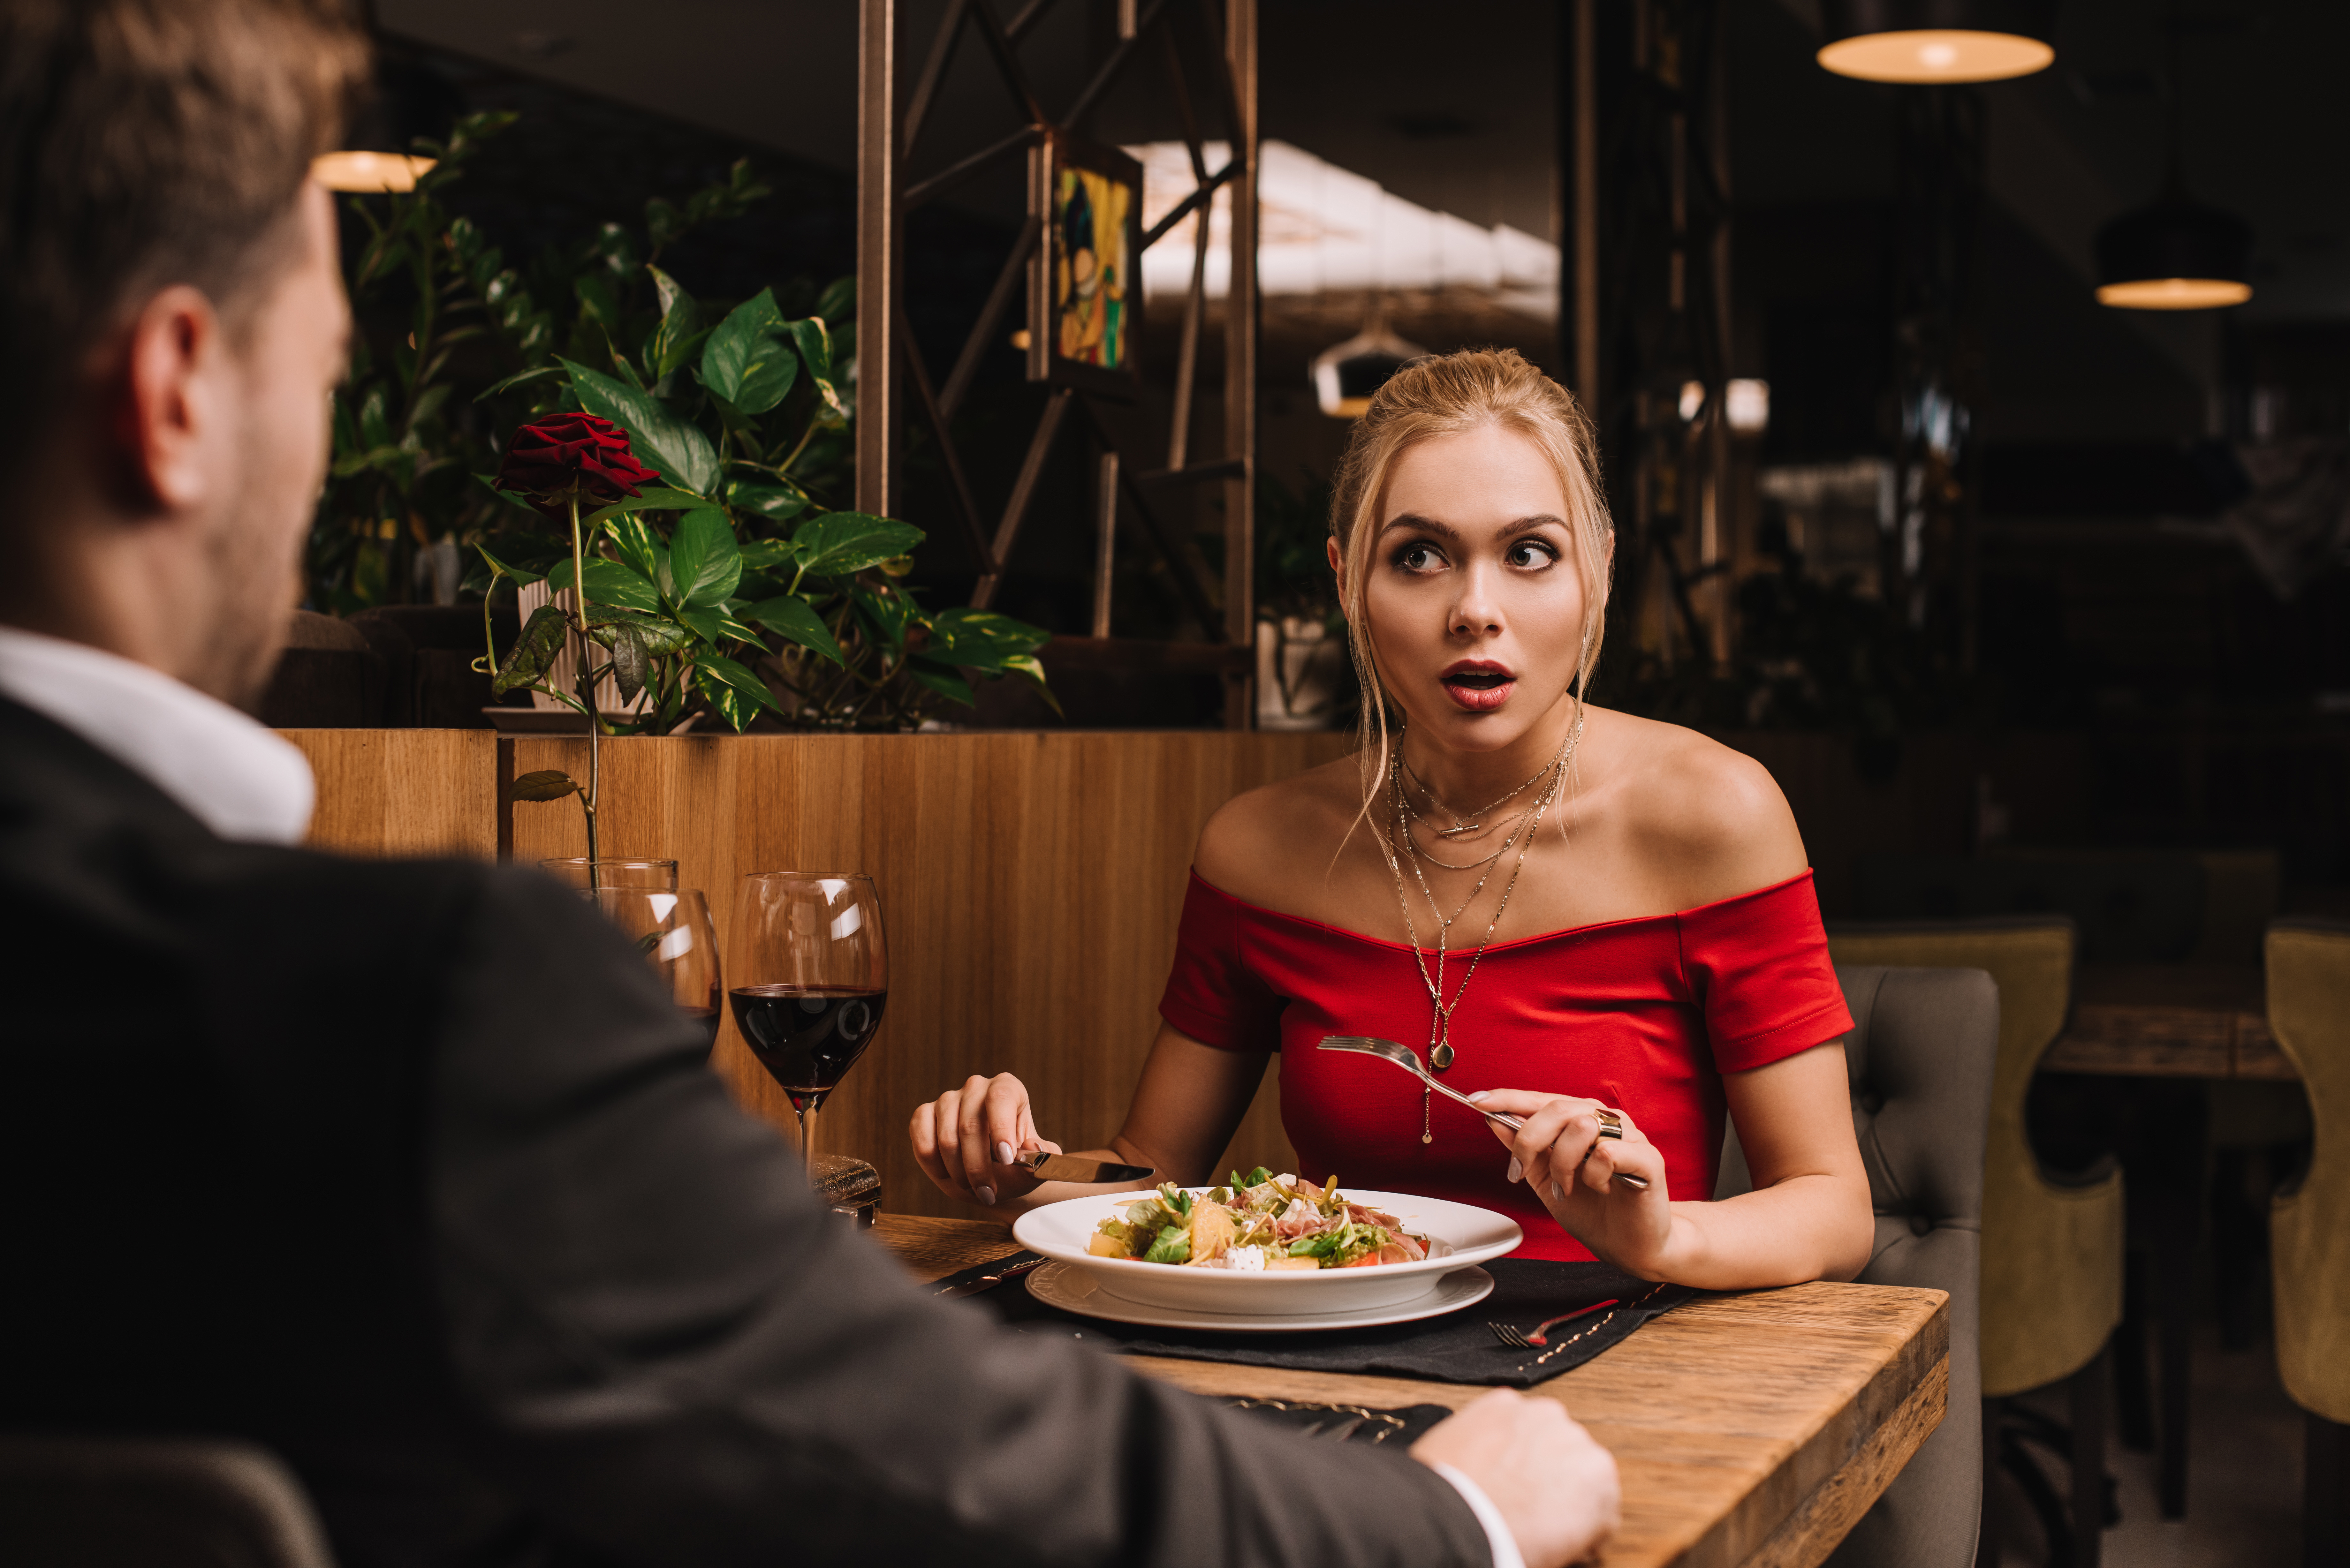 A shocked woman looking at a man in a restaurant | Source: Shutterstock